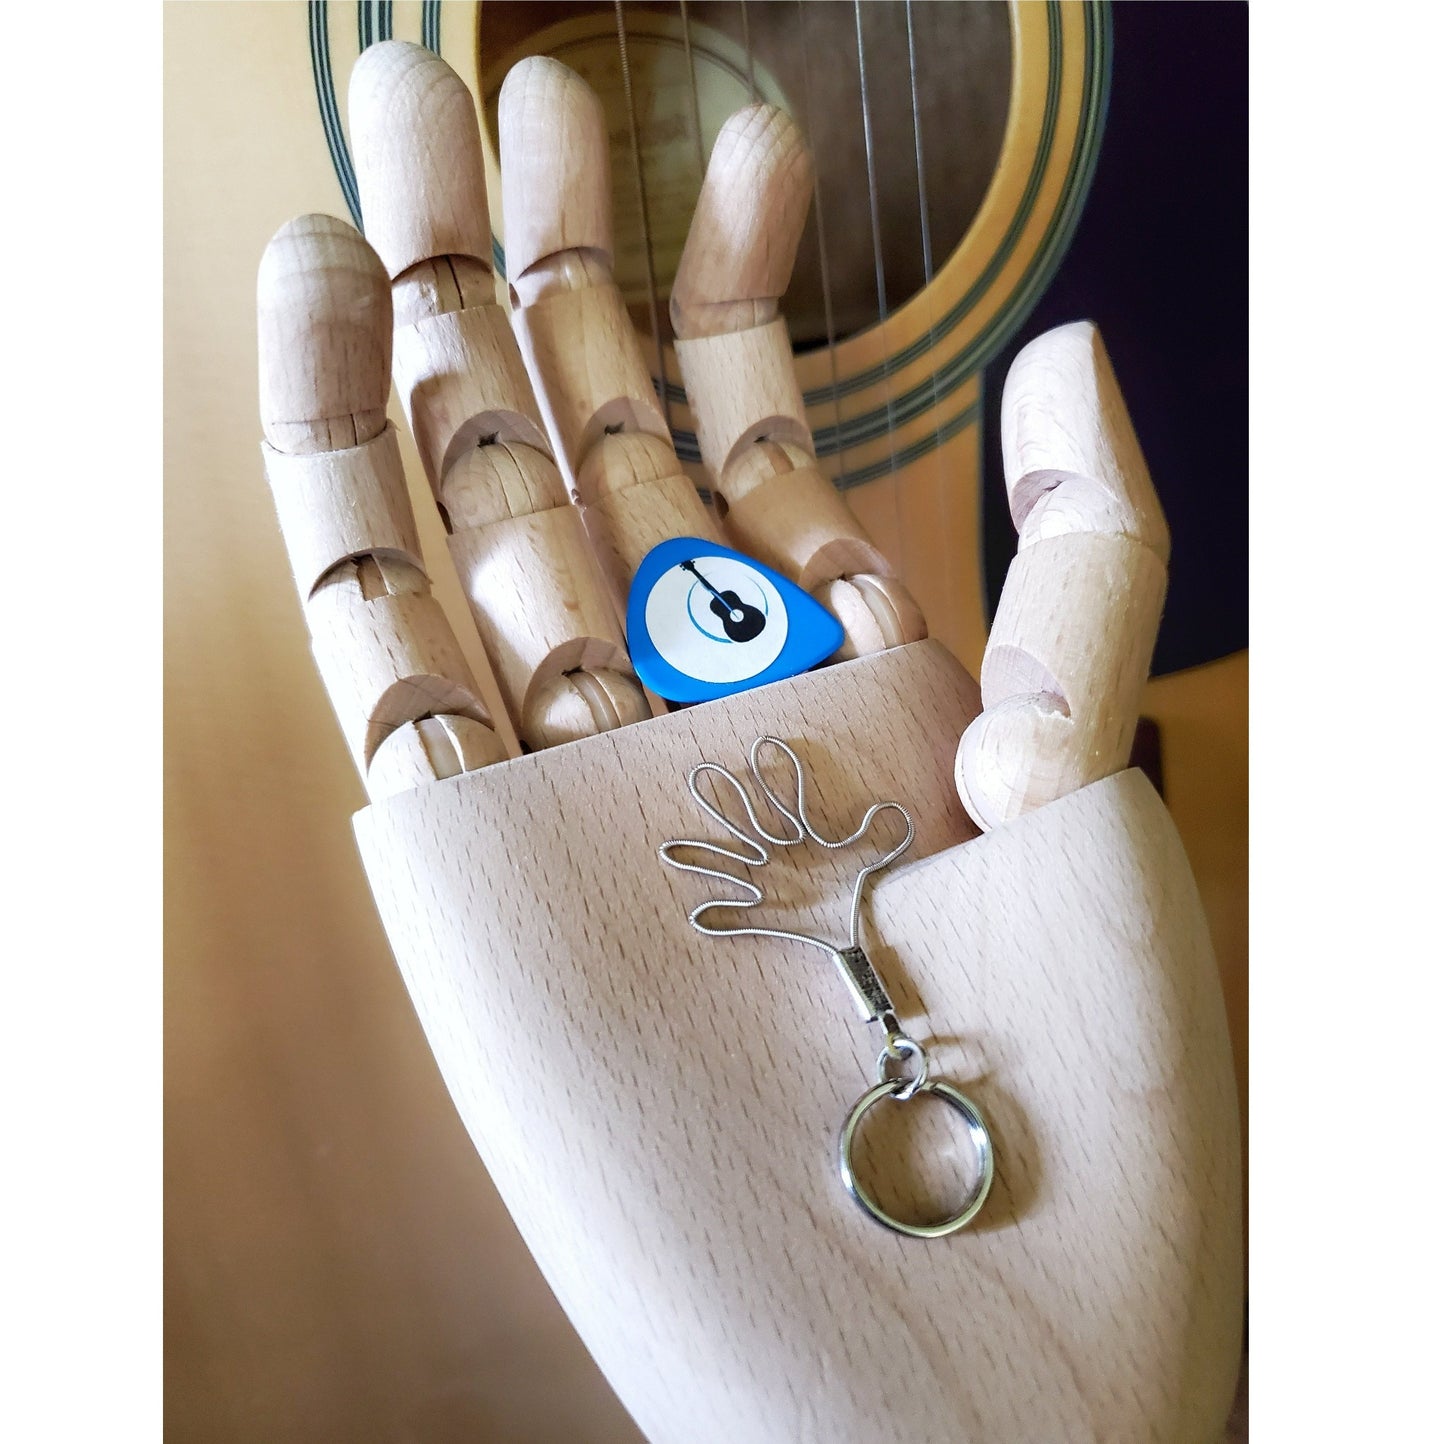 a keychain made from an upcycled guitar string shaped like a hand - above it is a blue guitar pick with an image of a black guitar - both are sitting in the palm of a wooden hand behind which is a beige guitar